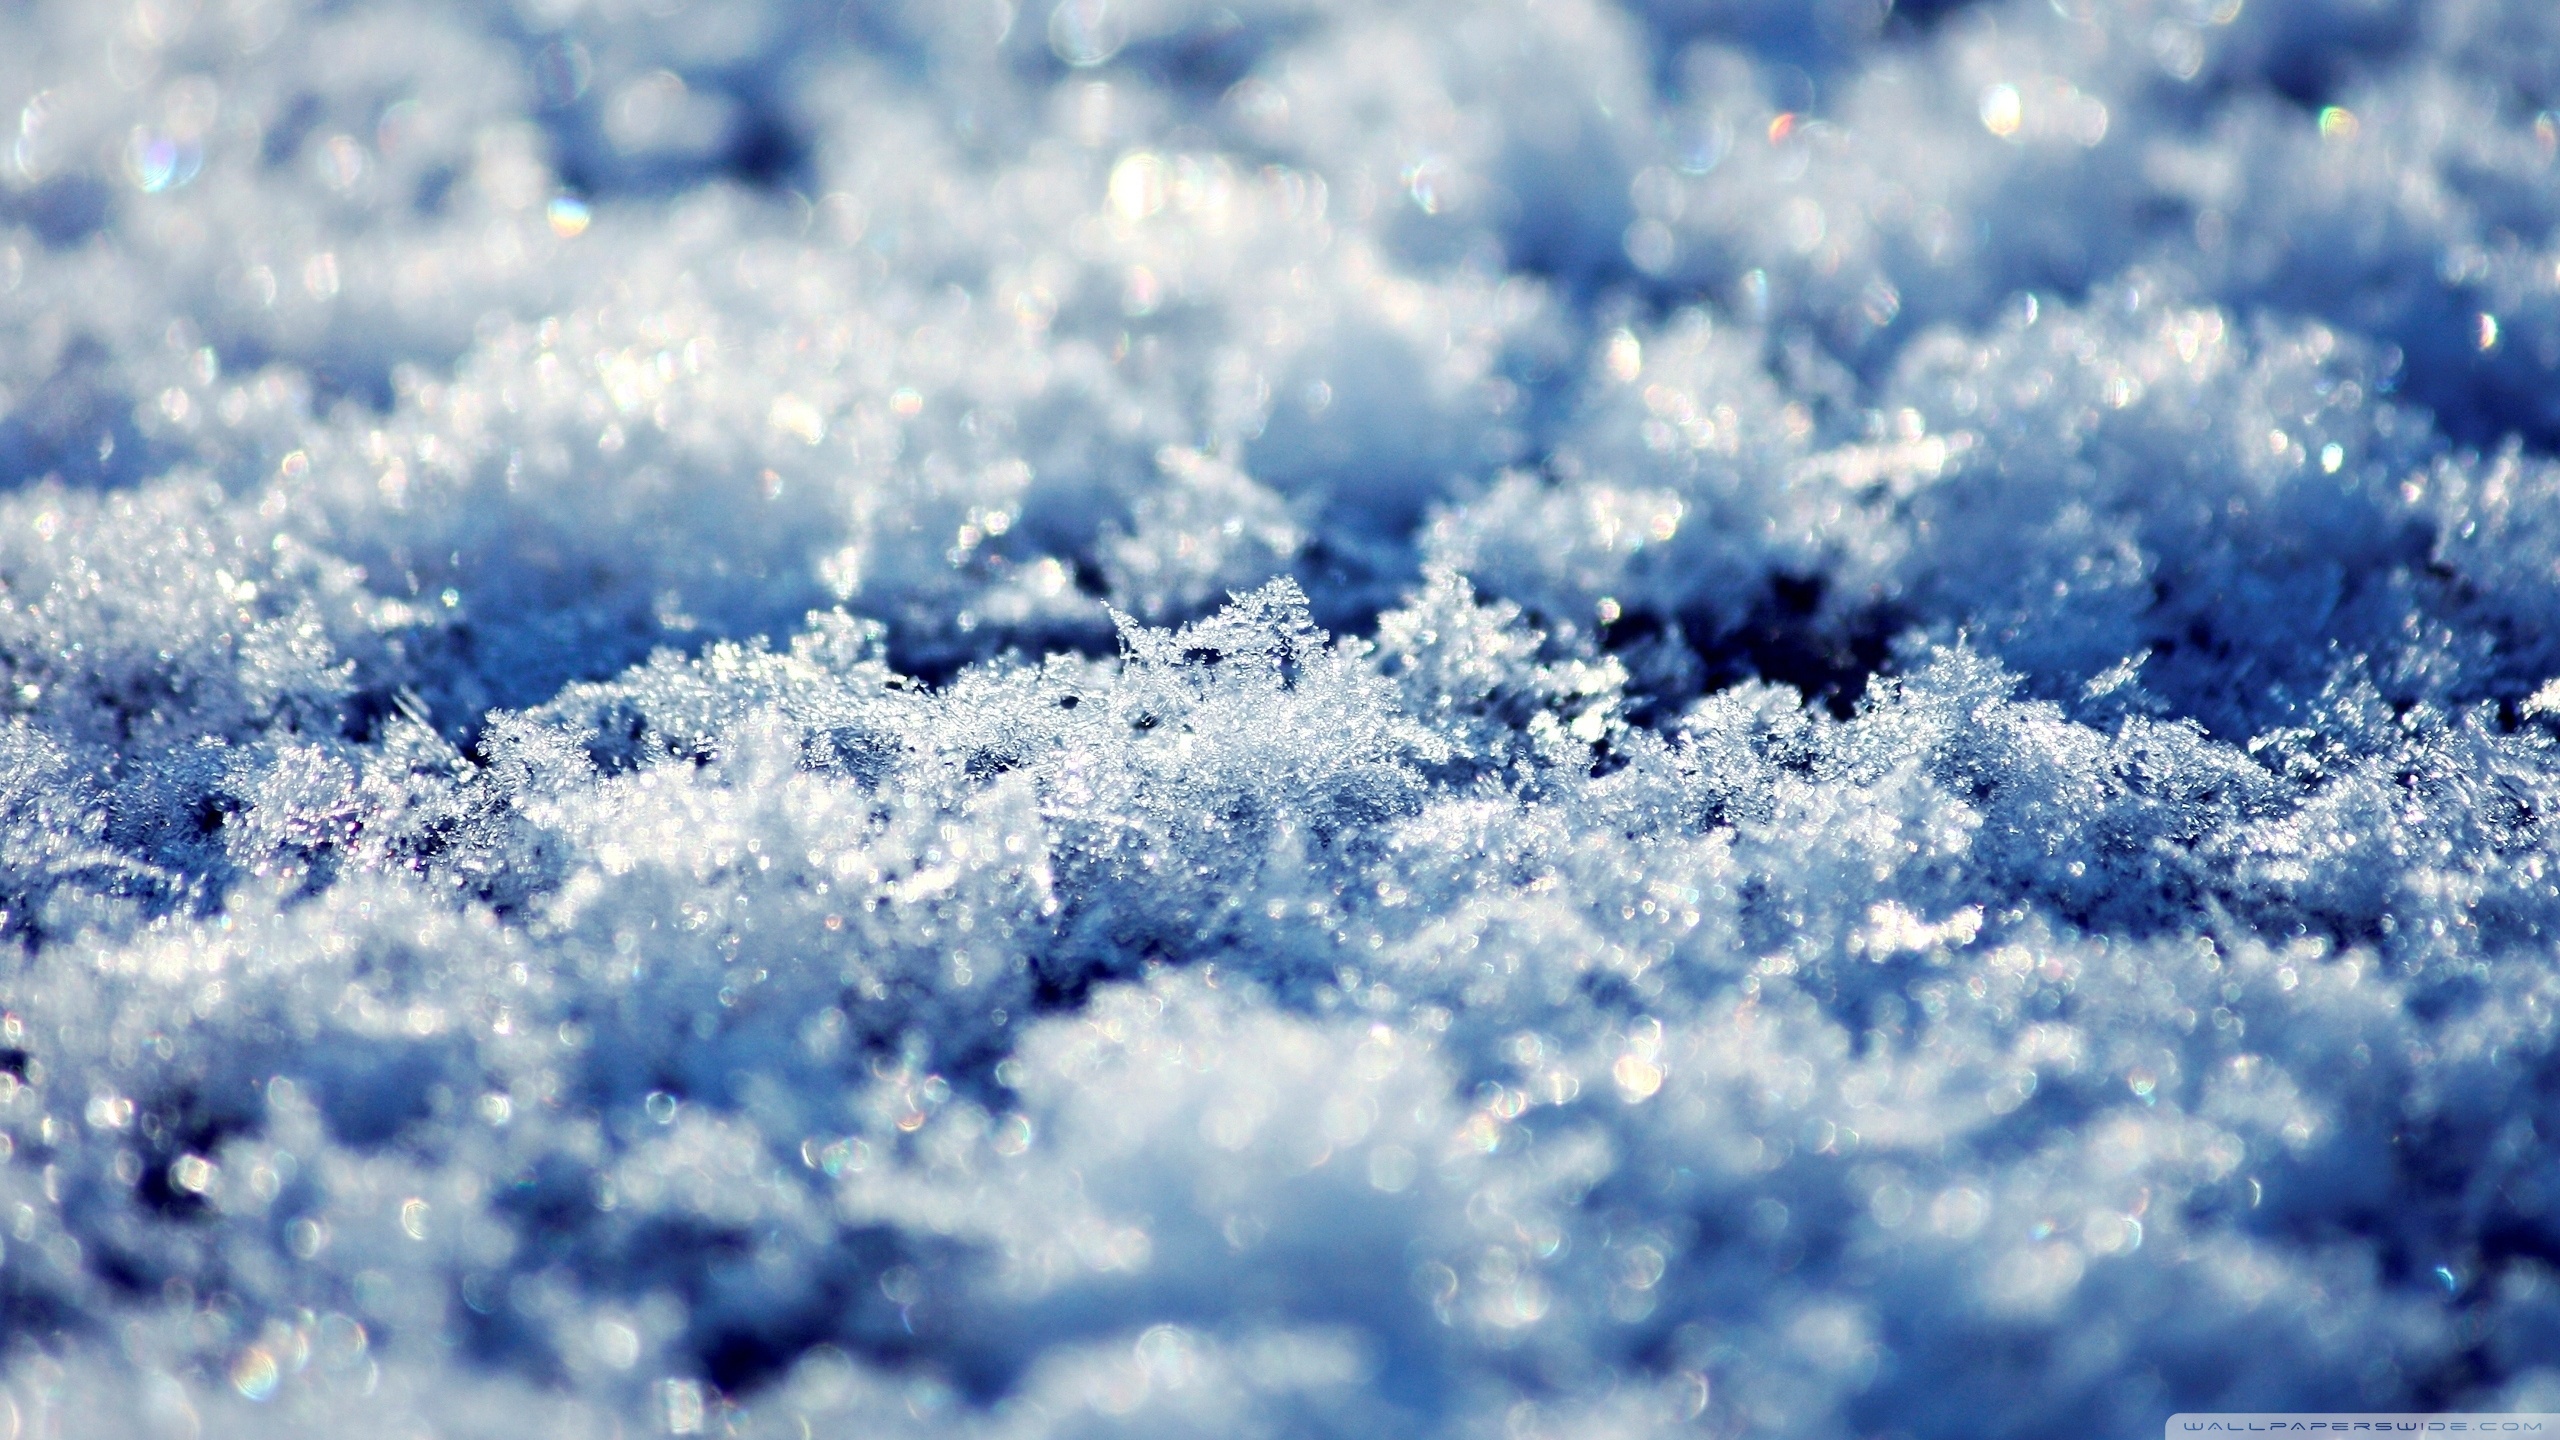 Blue snow wallpaper and image, picture, photo